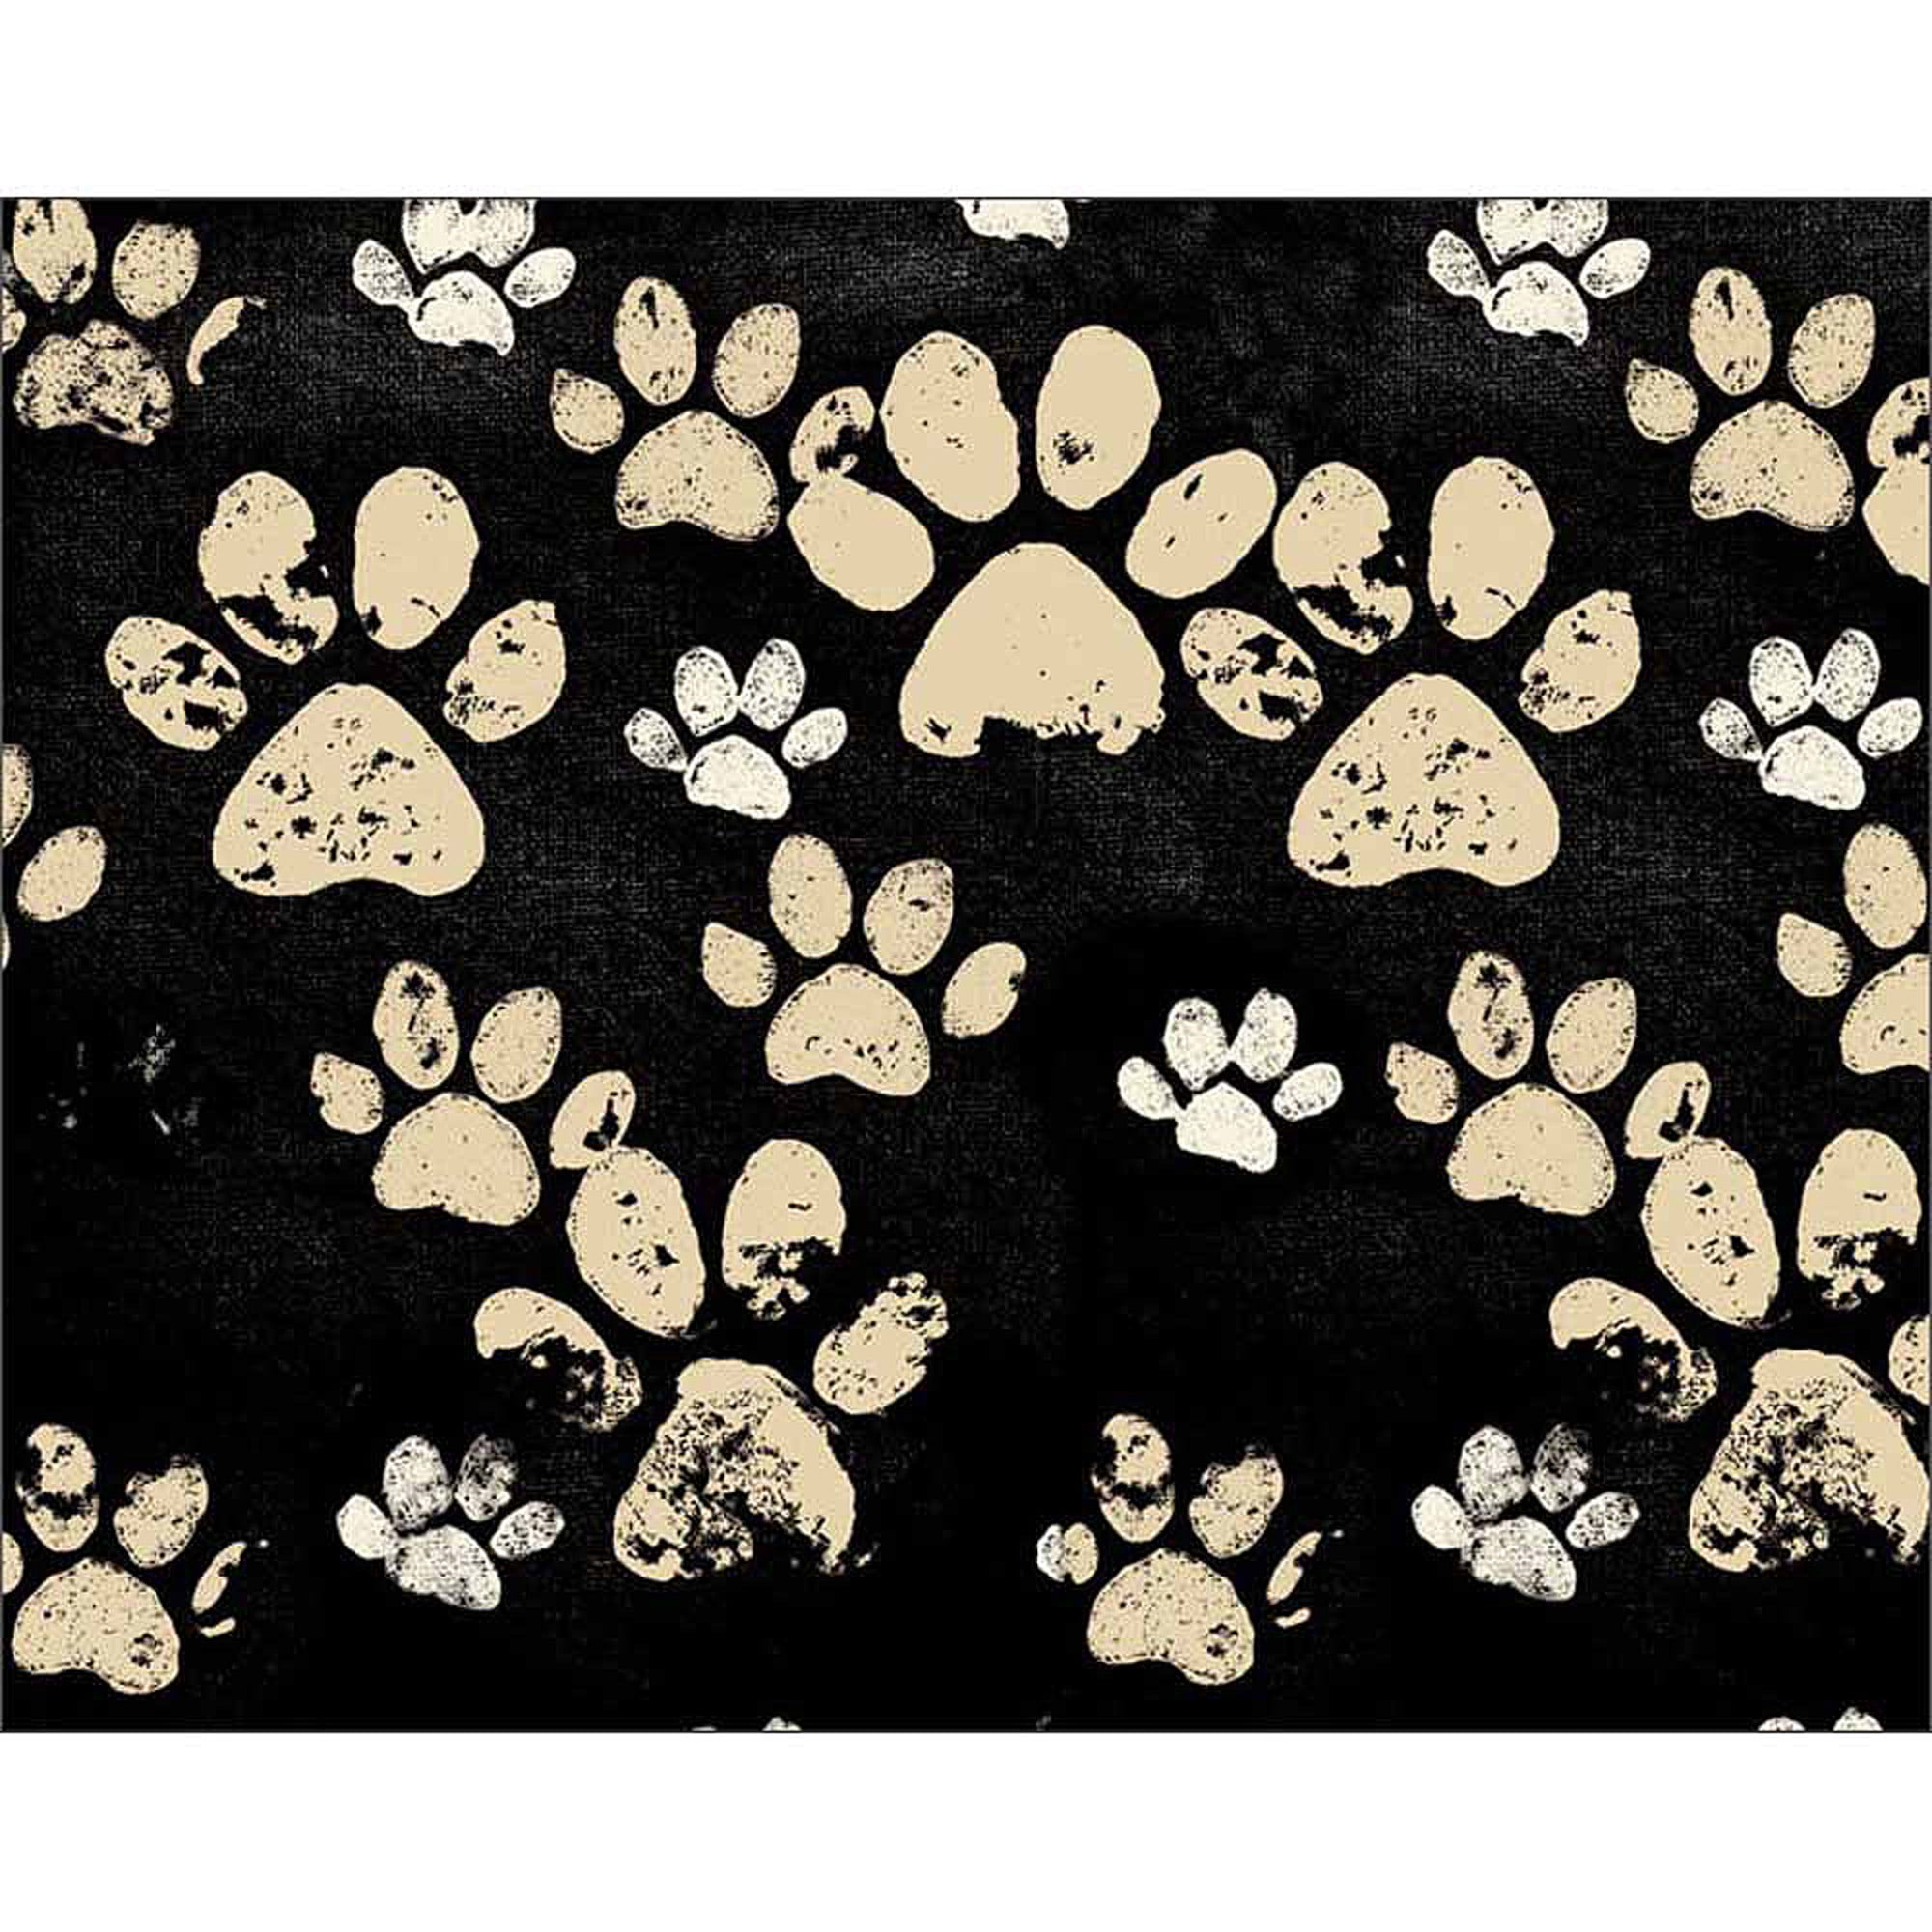 Distressed Paw Print Dog Cat Animal Pet Texture Painting Black Tan Canvas Art by Pied Piper Creative - Walmart.com